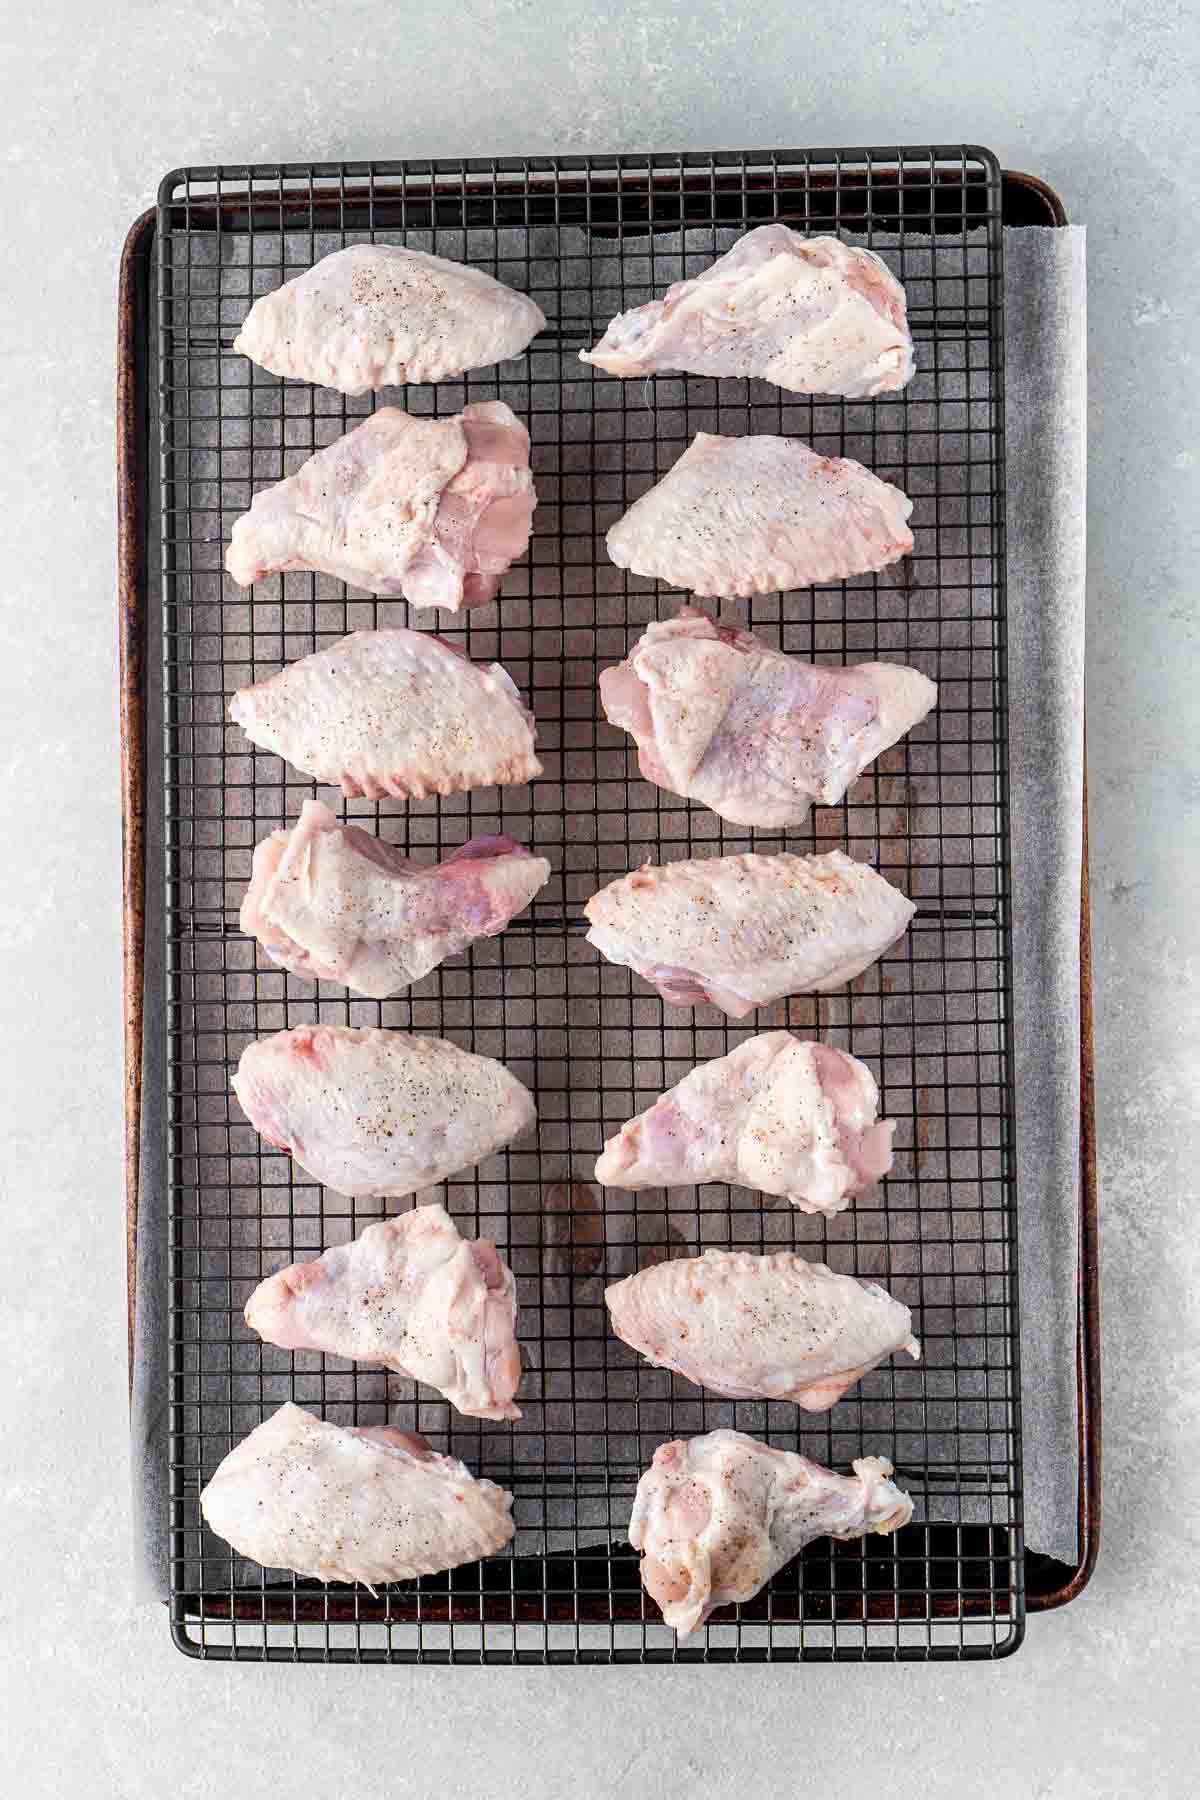 Chicken wings cut and laid out on a wire rack over a baking tray.